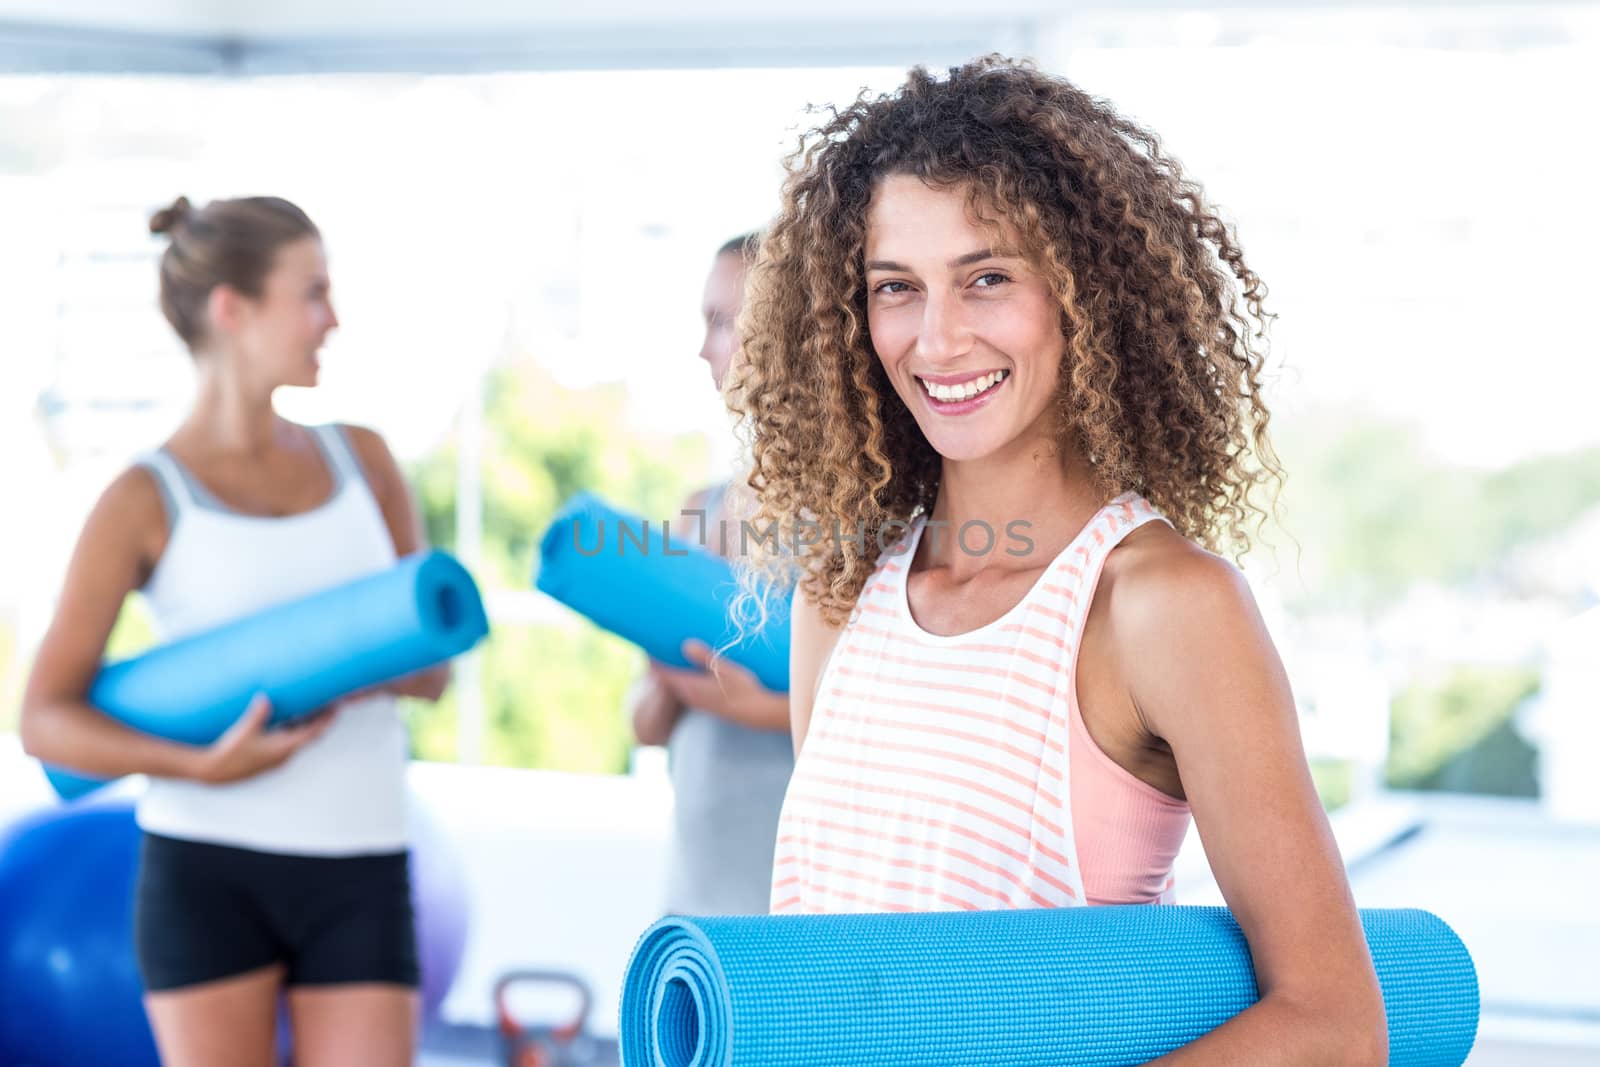 Portrait of smiling woman holding yoga mat in fitness studio